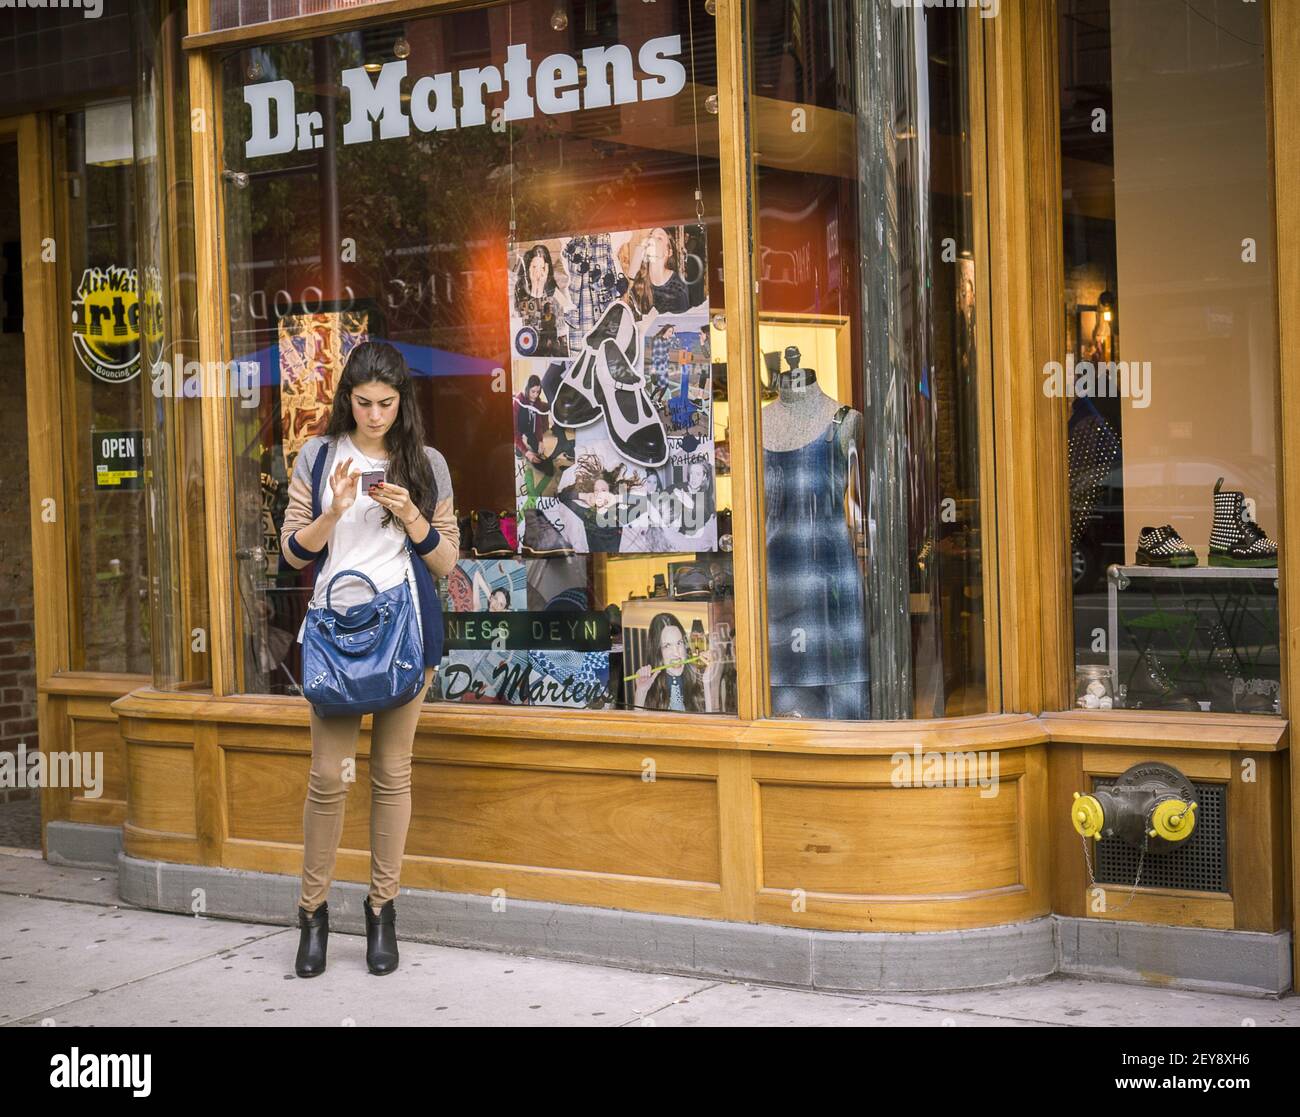 A Dr. Martens shoe store in New York is seen on Saturday, October 19, 2013.  The Permira private equity firm, which purchased Dr. Martens in 2013, is  reported to be selling the